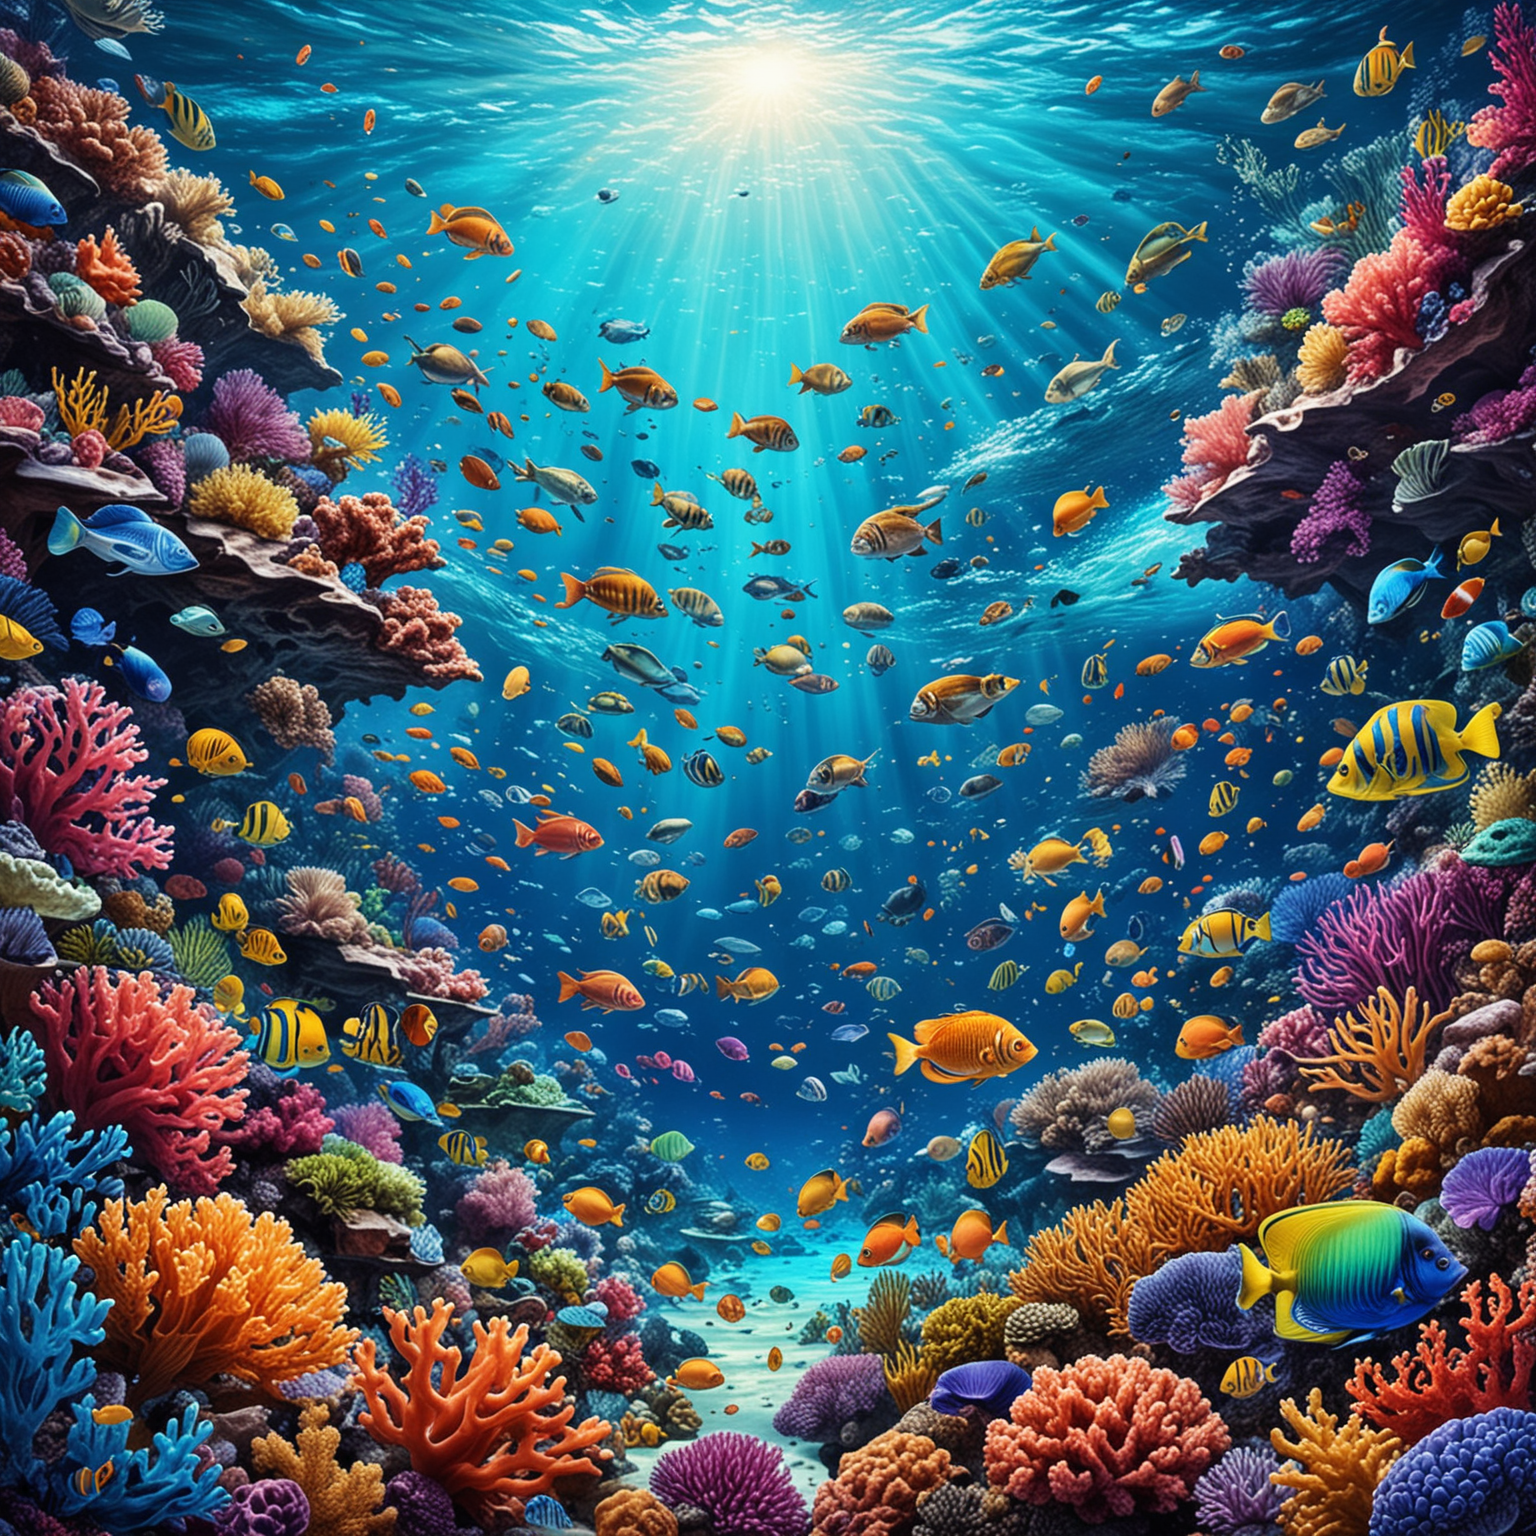 colorful ocean with fish, coral reefs and sea creatures